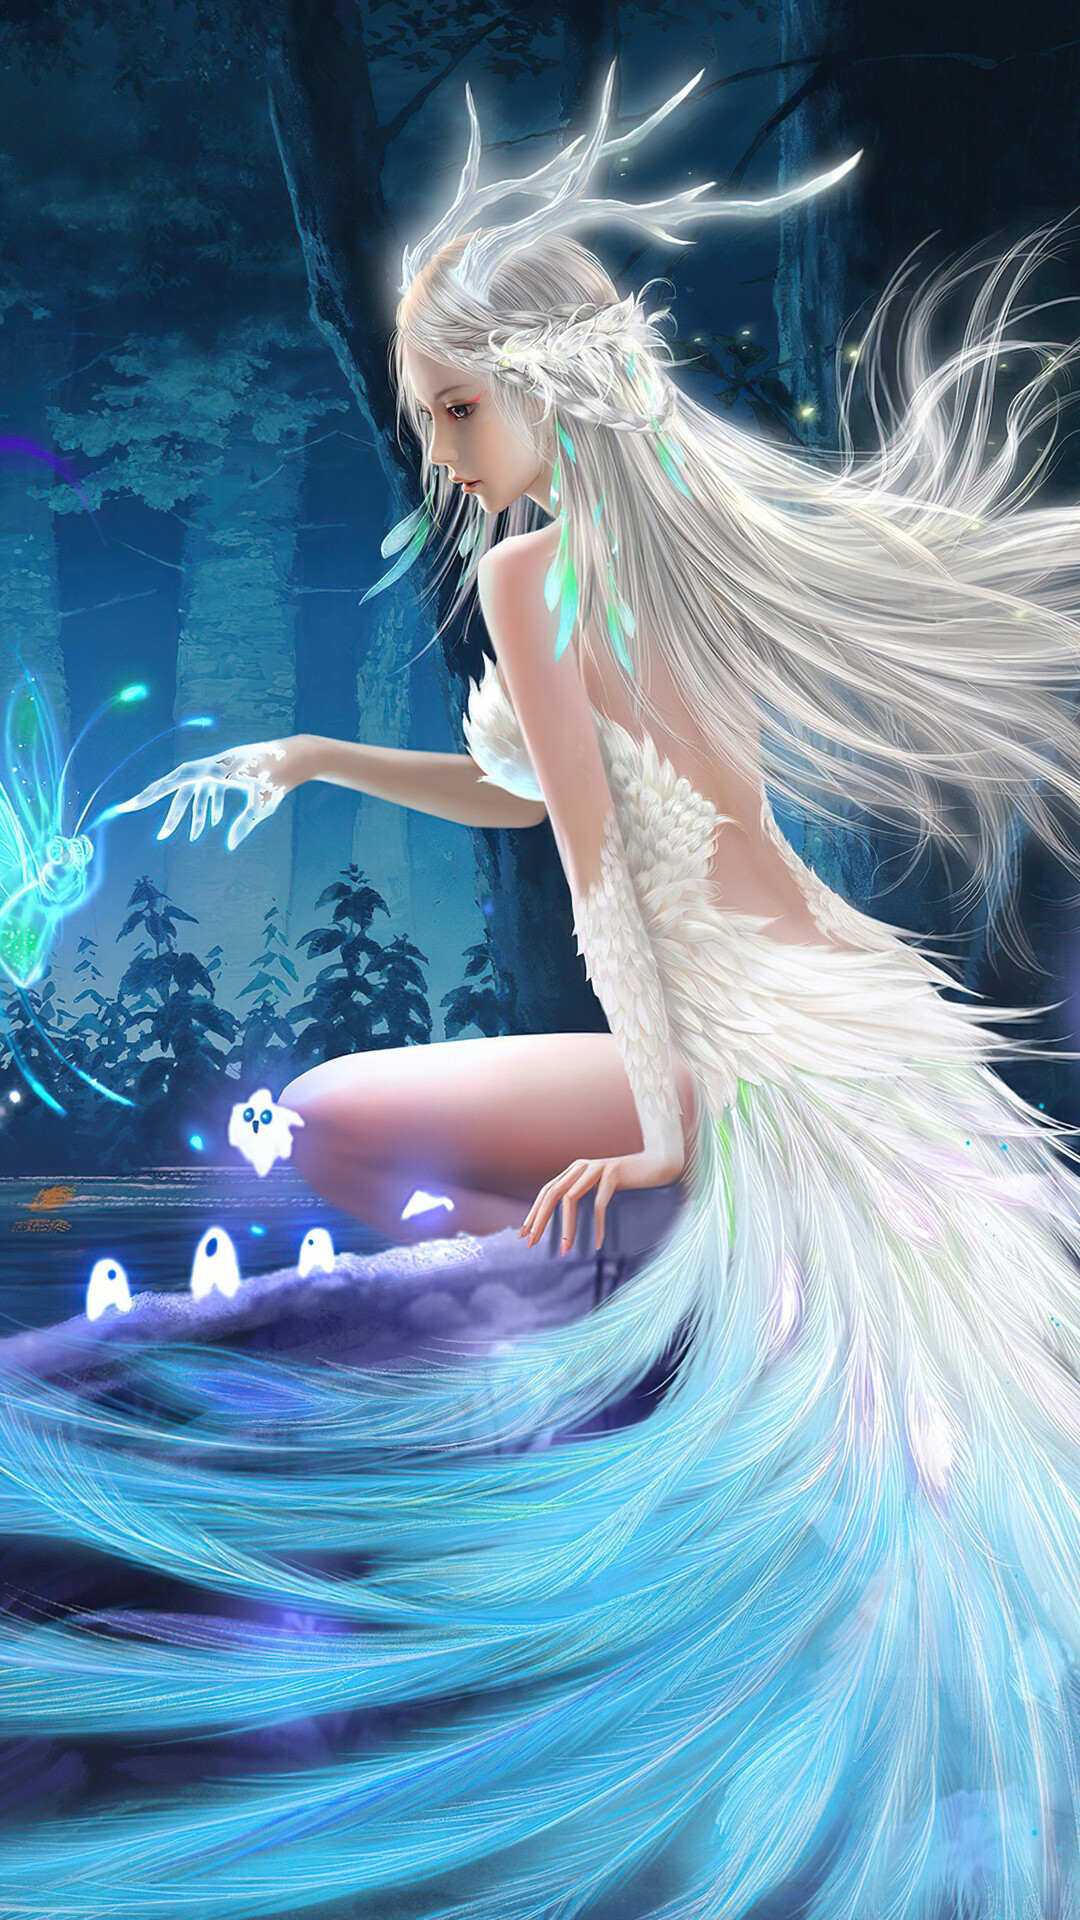 Fairy: An imaginary creature with wings, described in folklore. 1080x1920 Full HD Wallpaper.